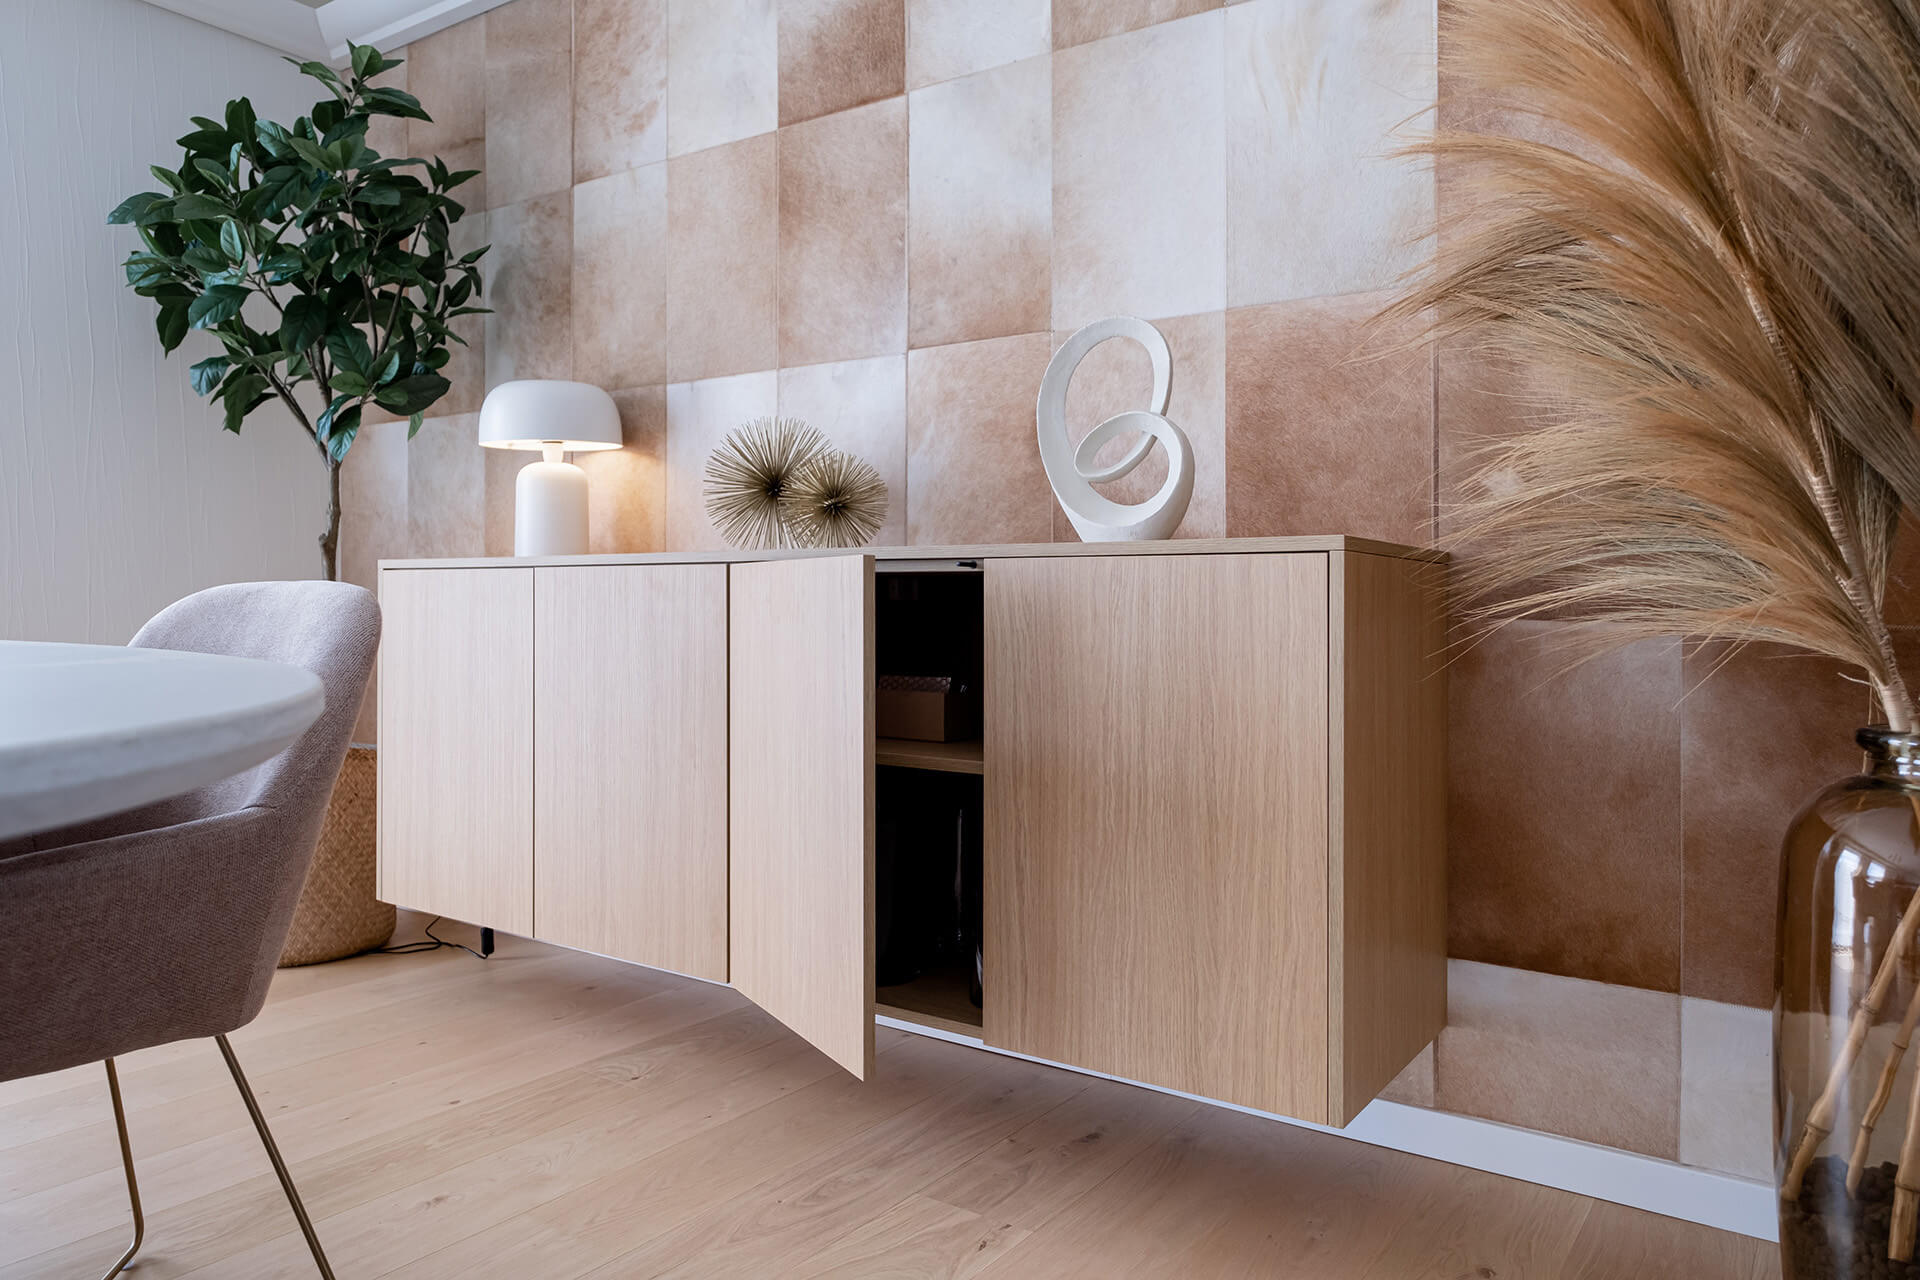 Bespoke oak floating chest of drawers for the living room in the colour Essential Oak Natural, from maatkastenonline